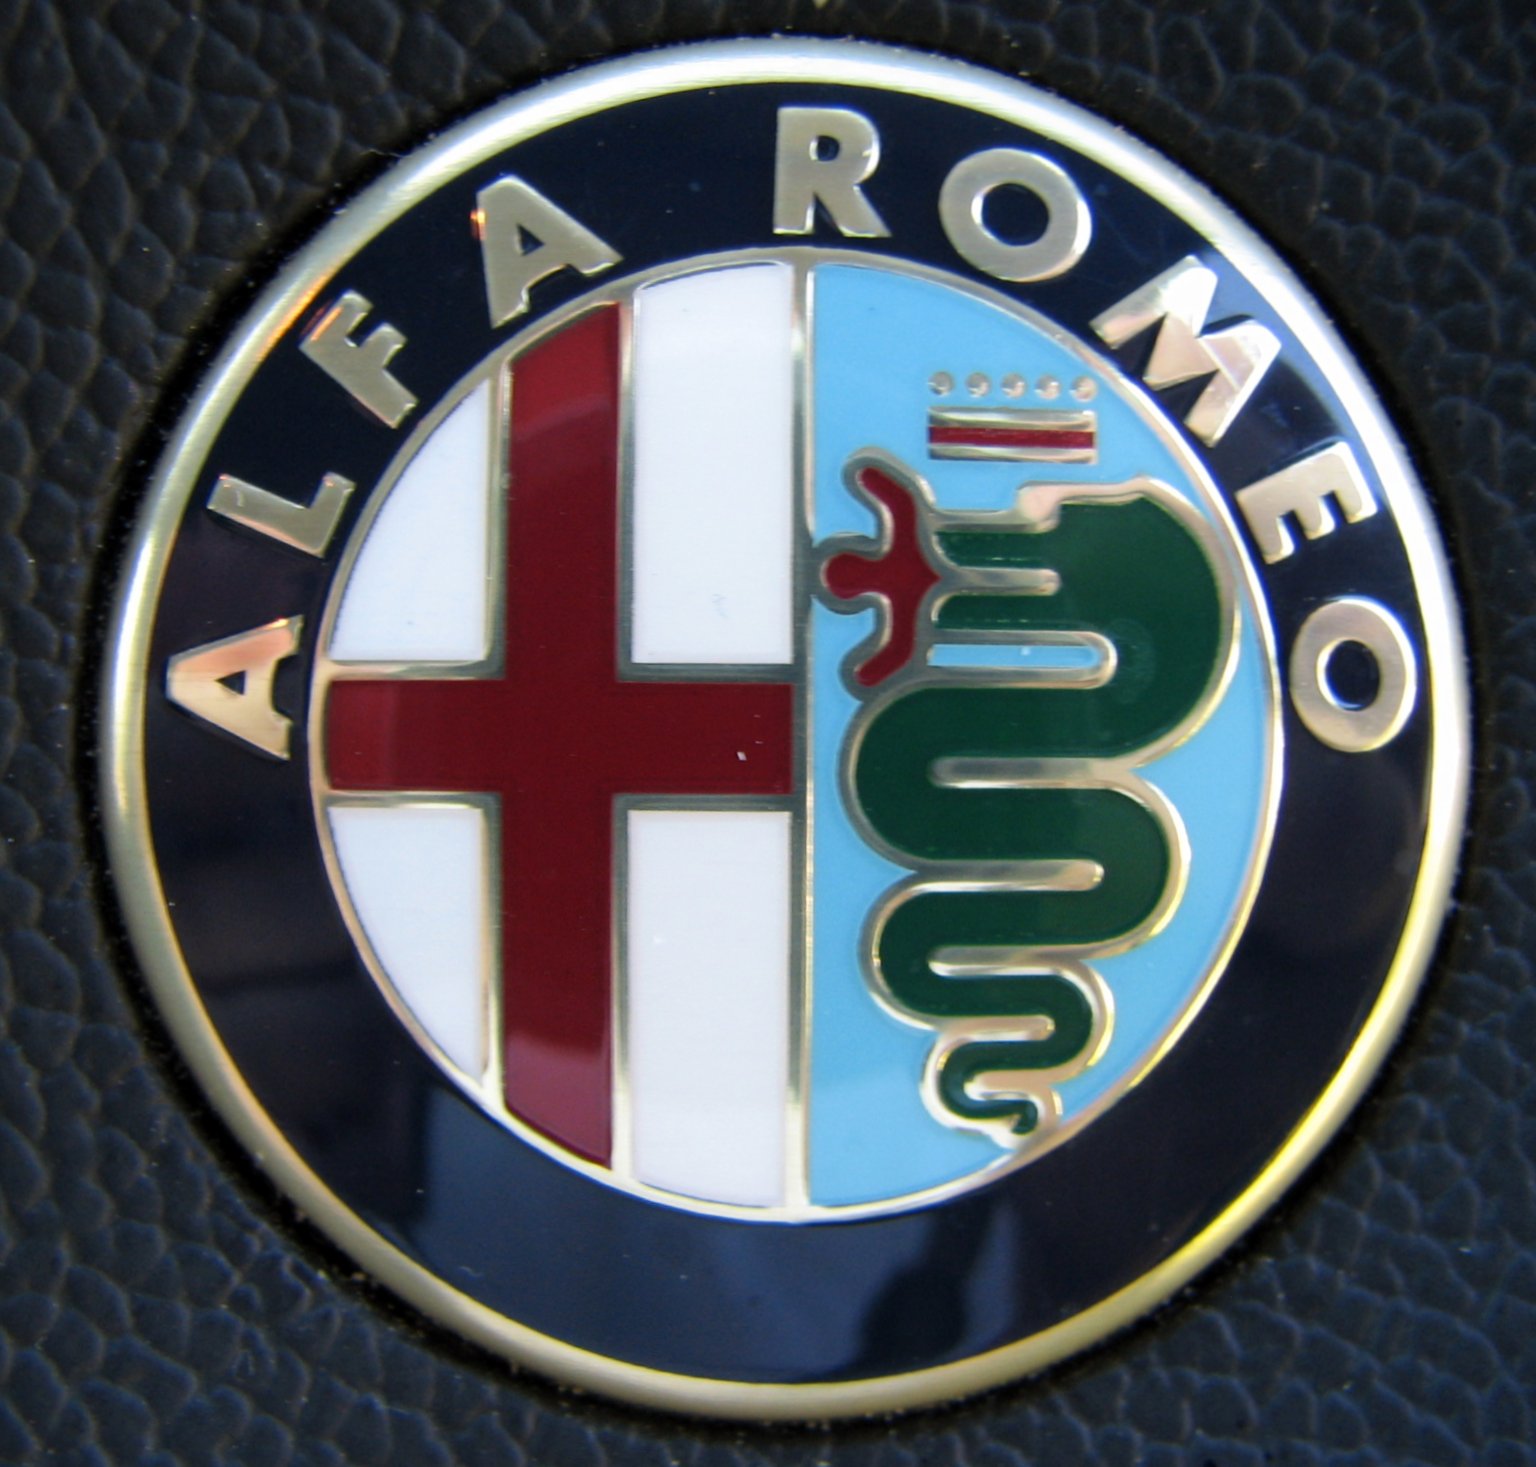 Alfa romeo 159 2 4 jtdm 20v hi-res stock photography and images - Alamy